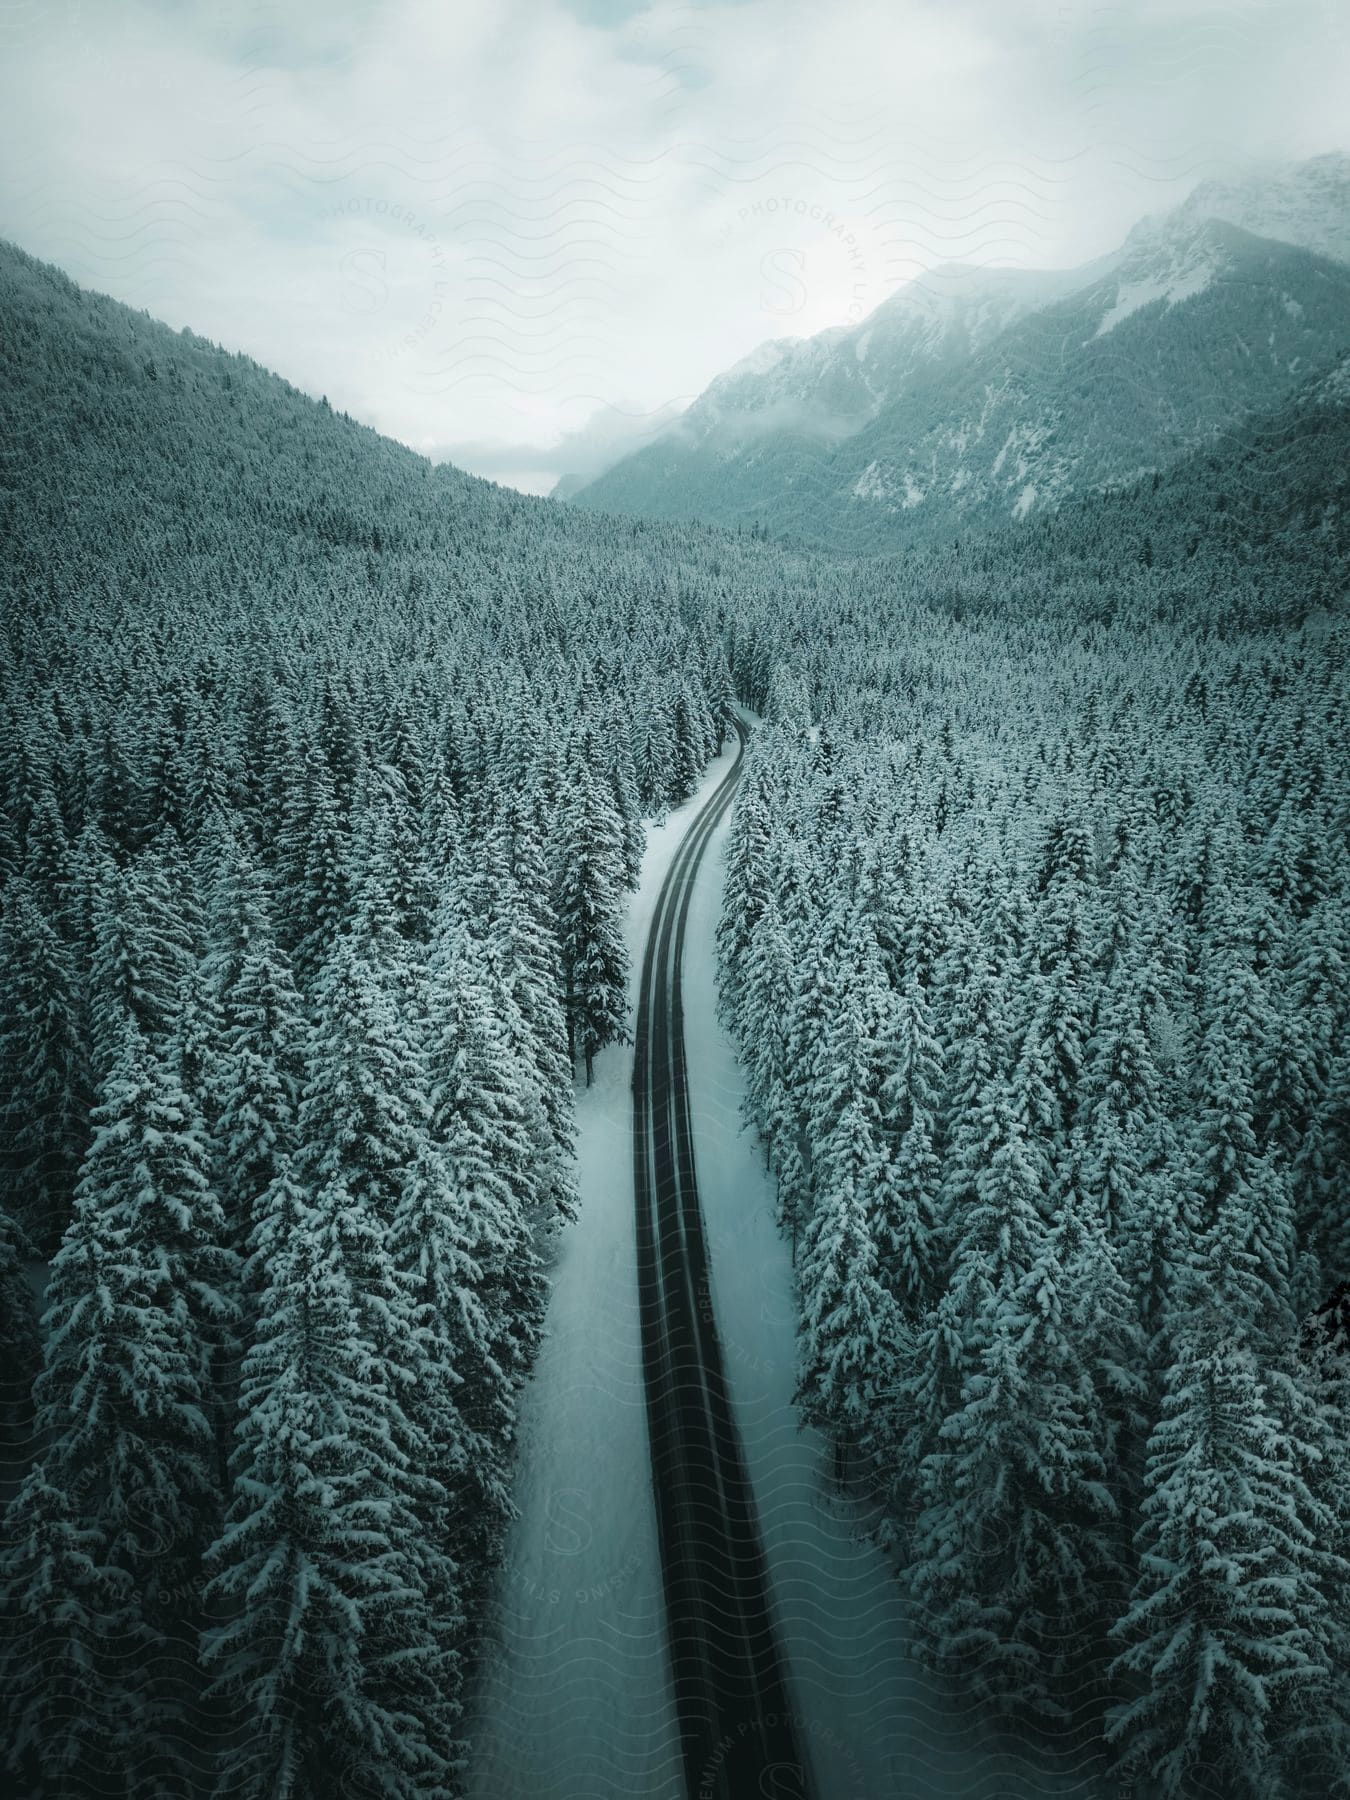 Train tracks running through a snowy forest valley with mountains in the distance